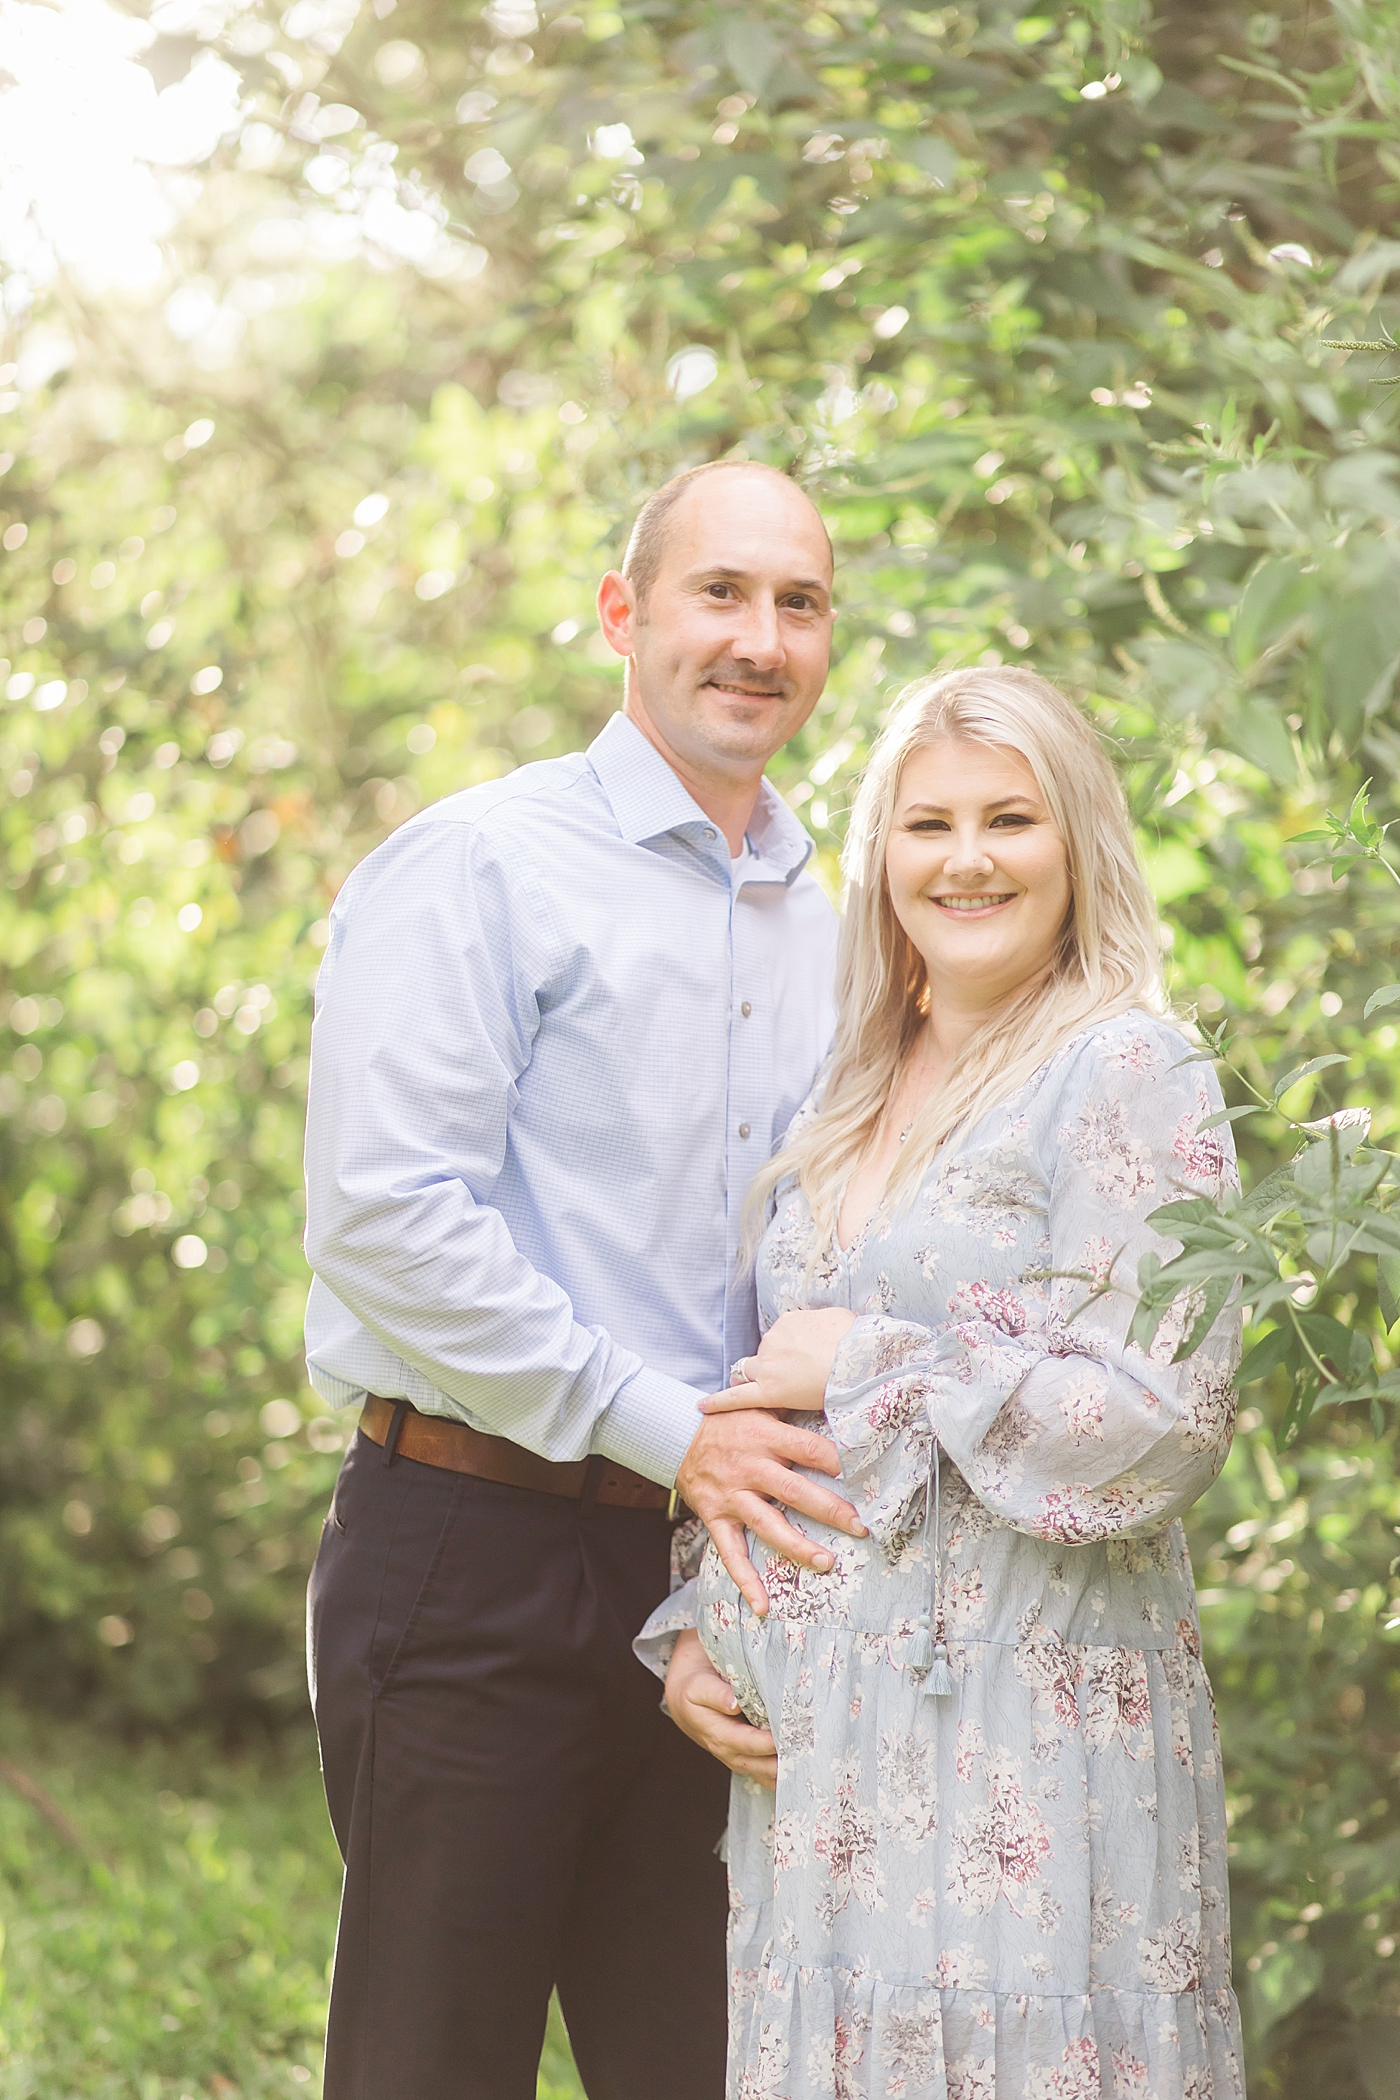 Sunset maternity photos with Fresh Light Photography in Houston, Texas.